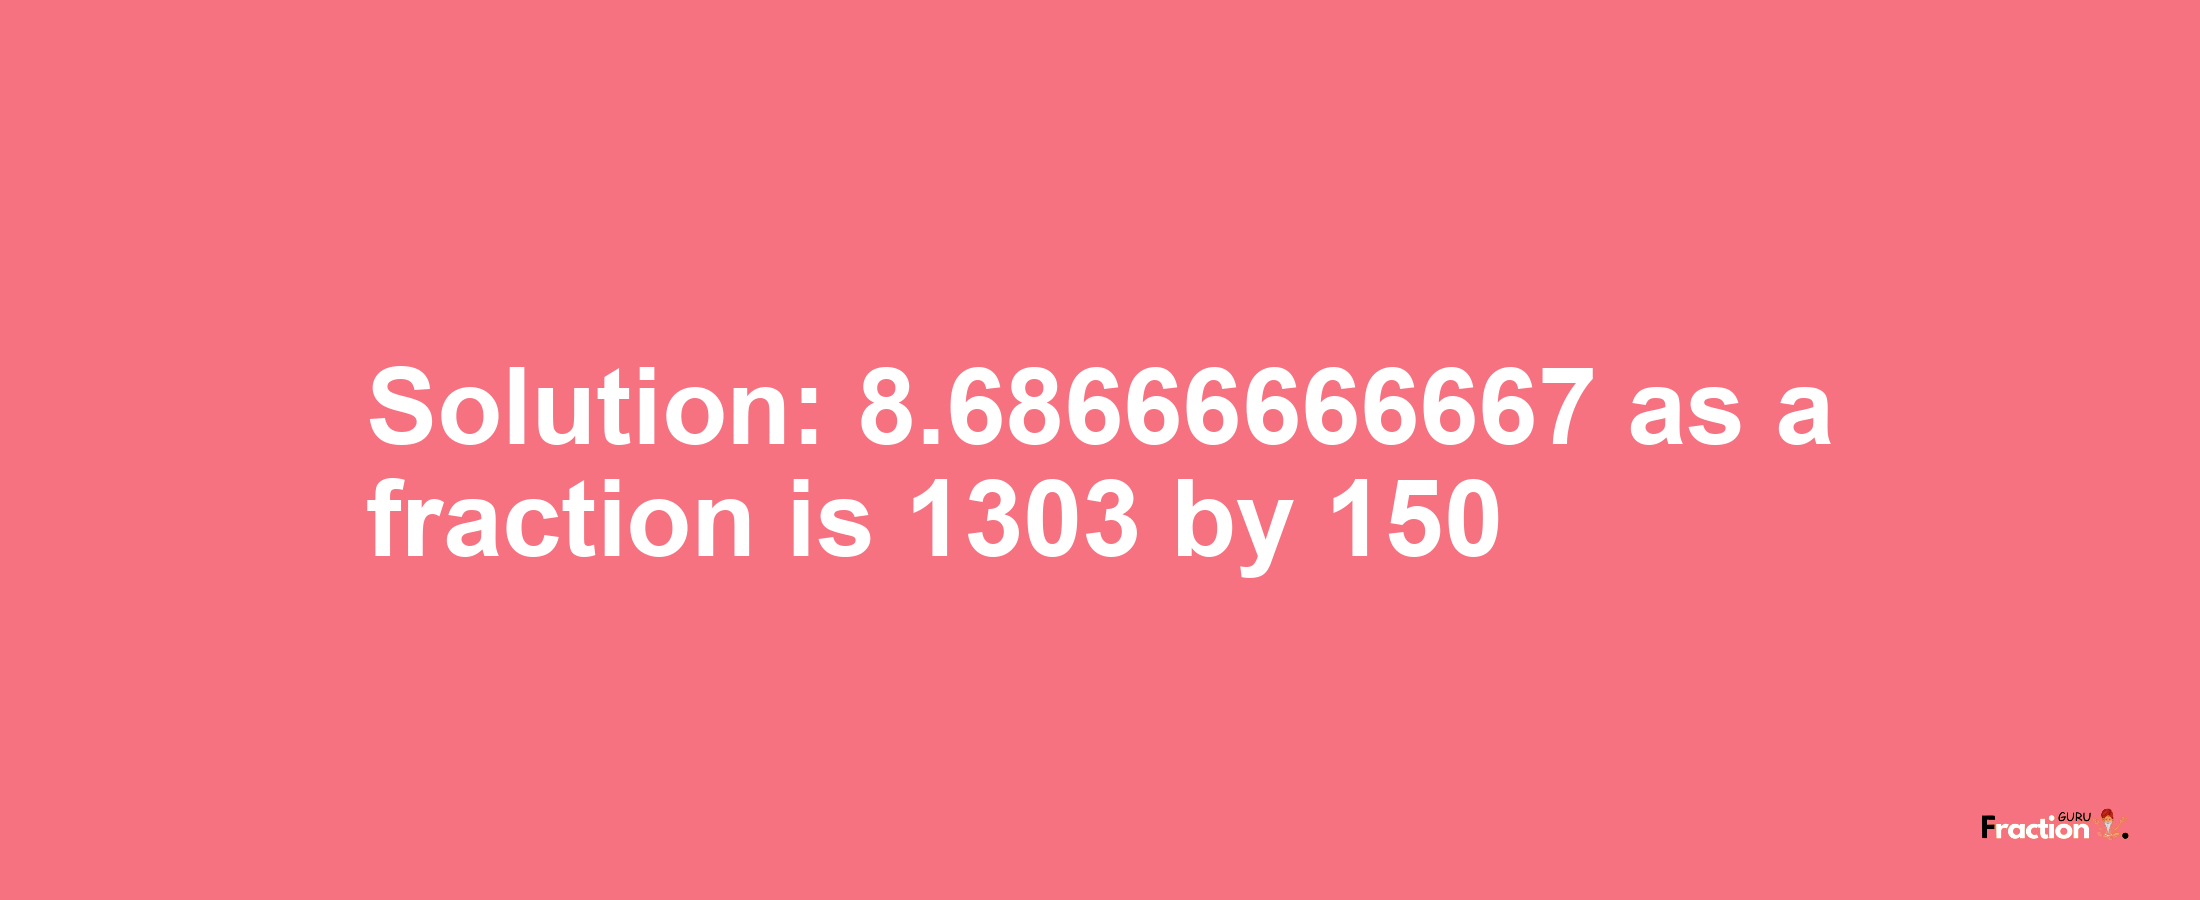 Solution:8.68666666667 as a fraction is 1303/150